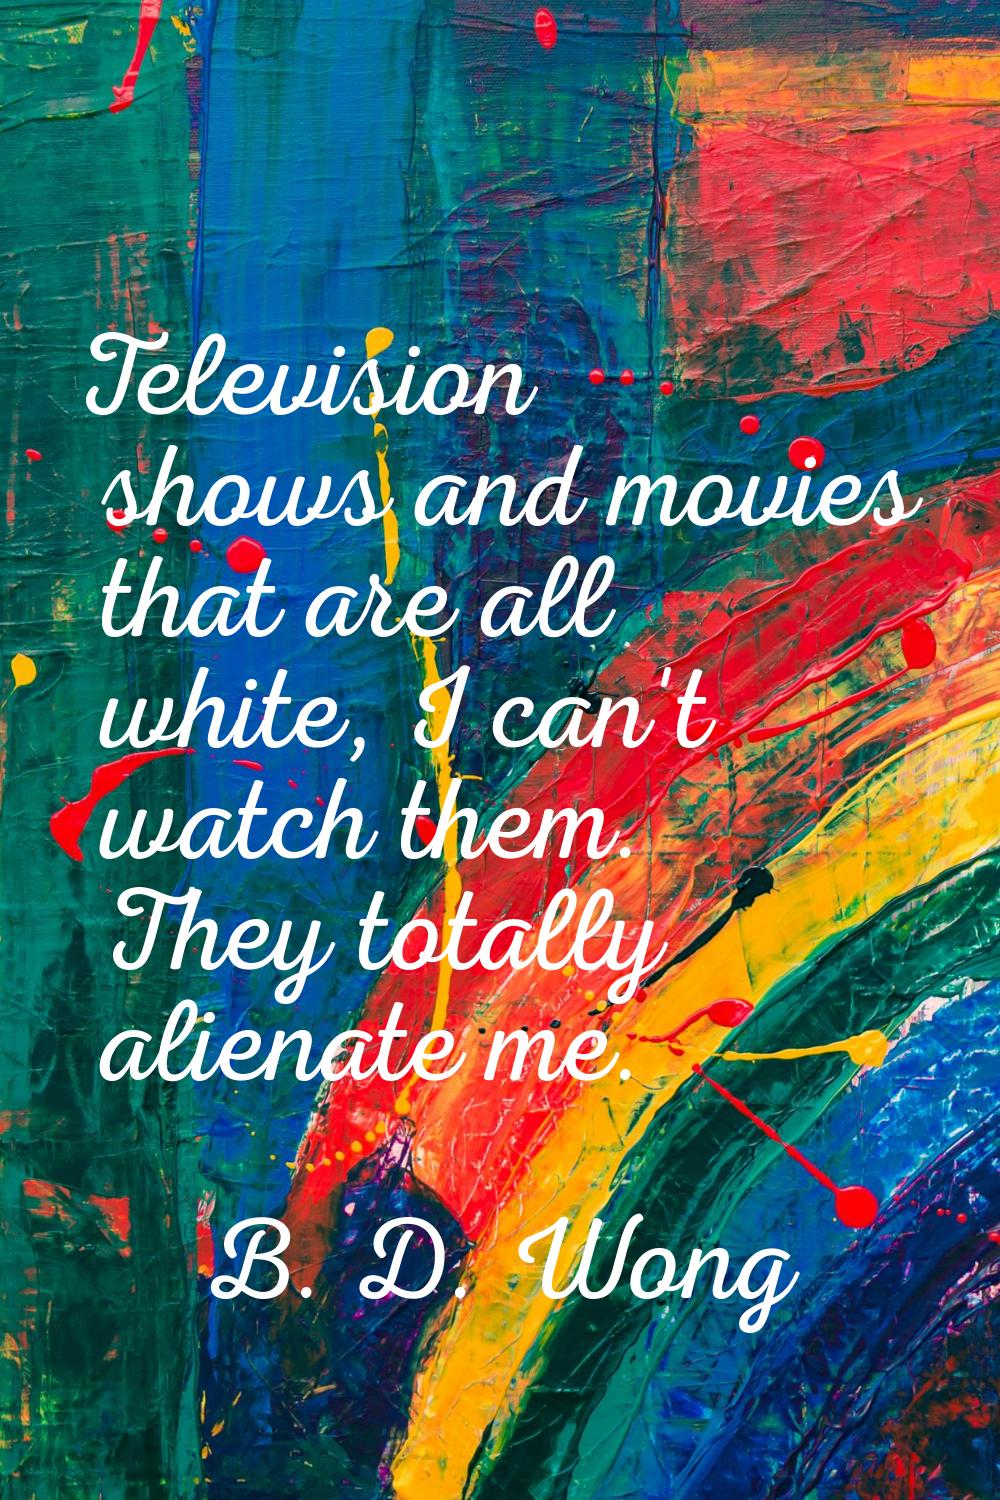 Television shows and movies that are all white, I can't watch them. They totally alienate me.